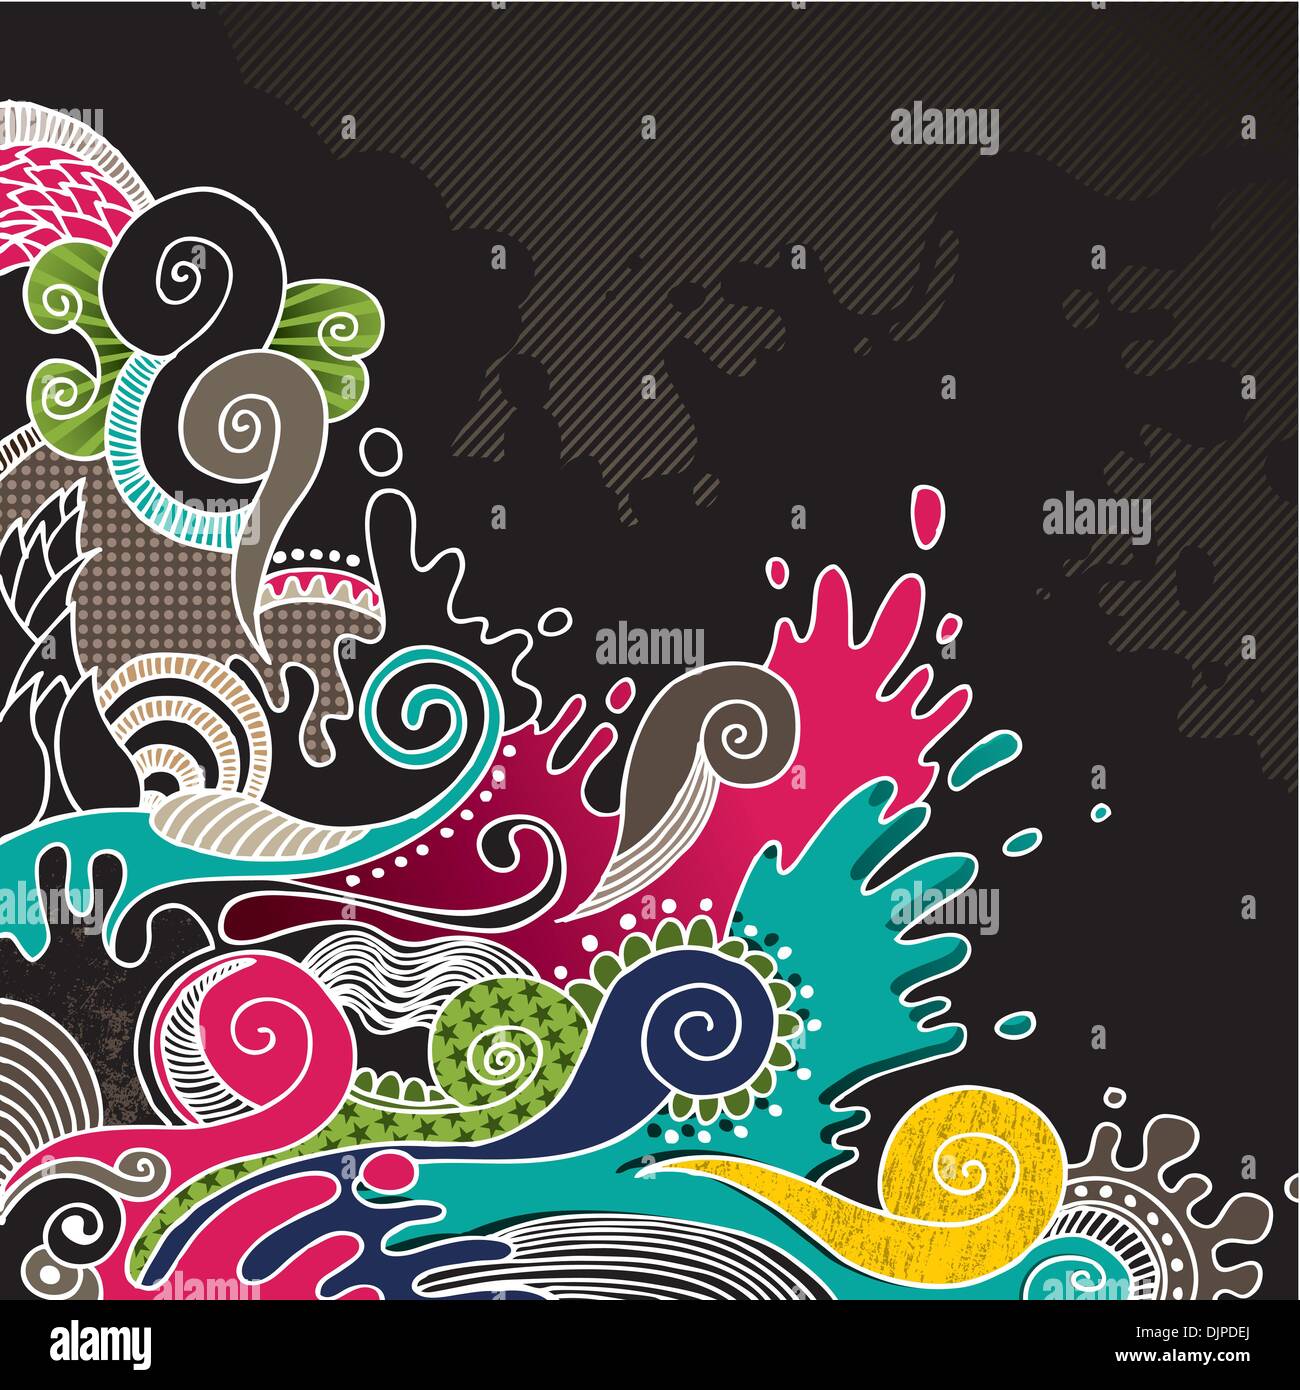 Psychedelic artistic colored background Stock Vector